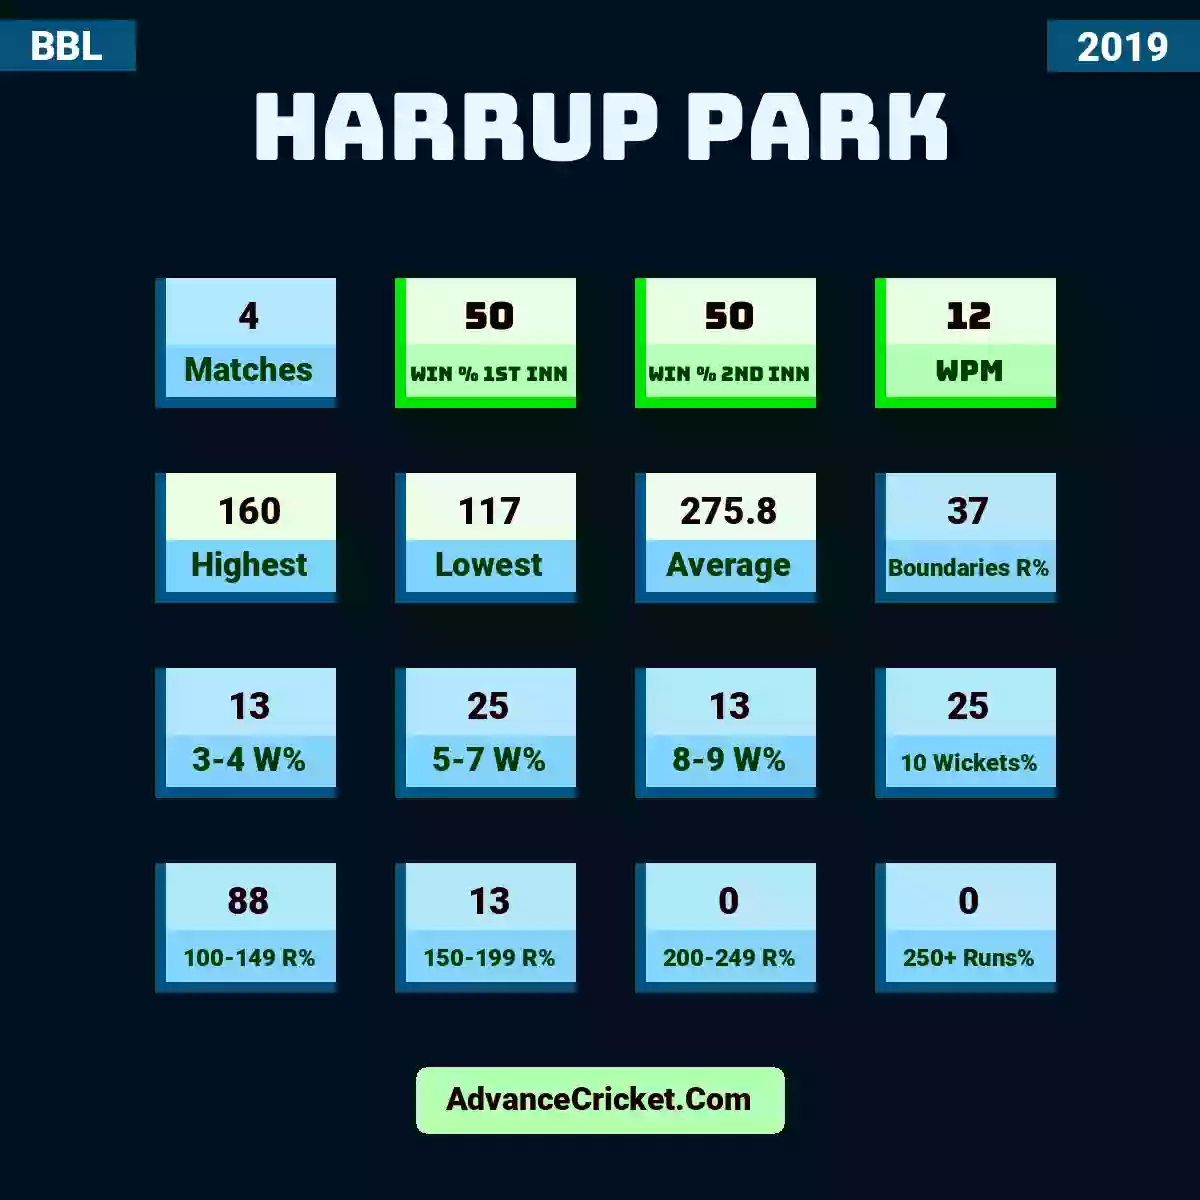 Image showing Harrup Park with Matches: 4, Win % 1st Inn: 50, Win % 2nd Inn: 50, WPM: 12, Highest: 160, Lowest: 117, Average: 275.8, Boundaries R%: 37, 3-4 W%: 13, 5-7 W%: 25, 8-9 W%: 13, 10 Wickets%: 25, 100-149 R%: 88, 150-199 R%: 13, 200-249 R%: 0, 250+ Runs%: 0.